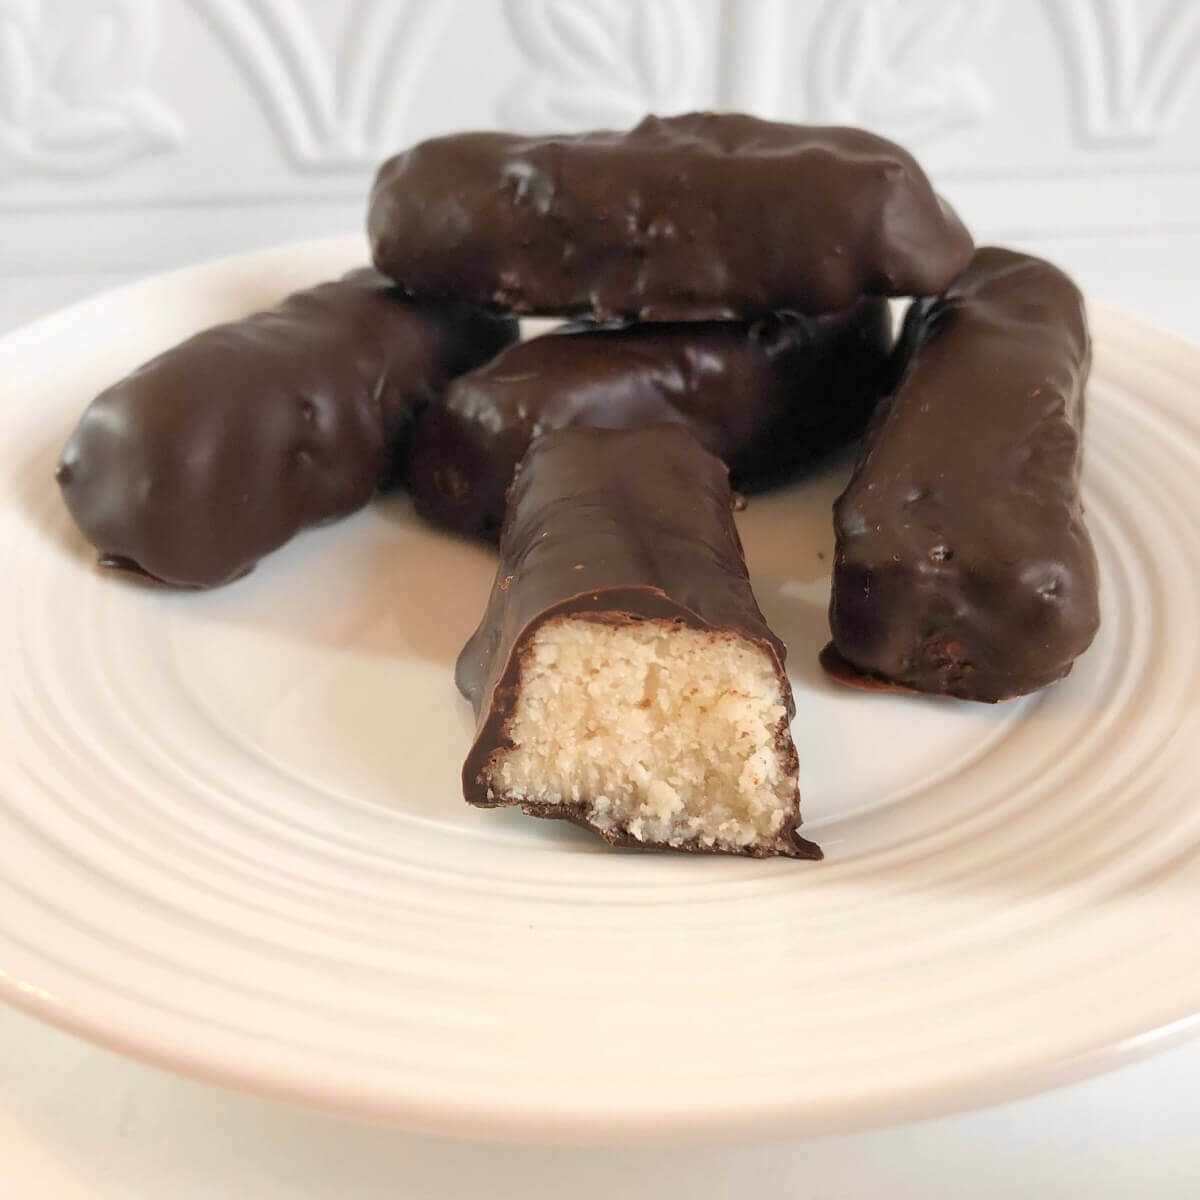 Coconut candy bars displayed on a plate.